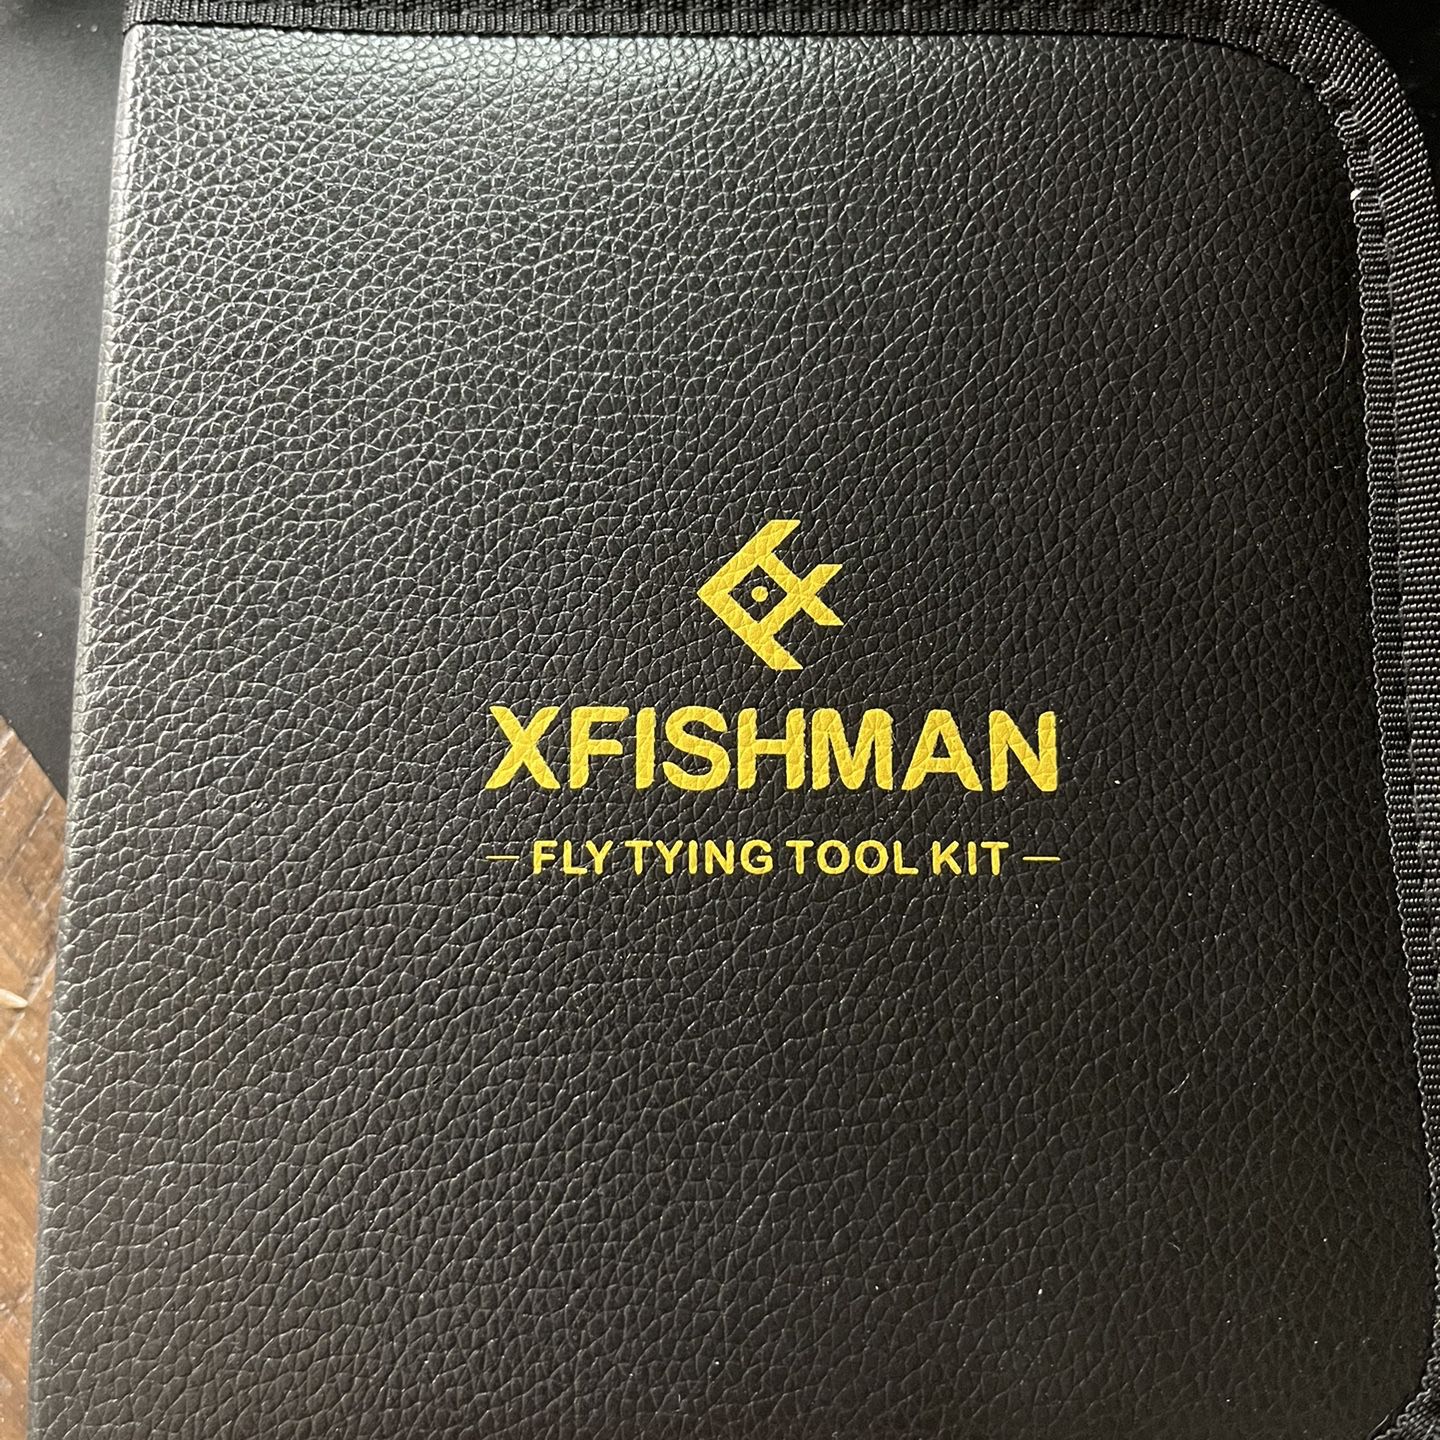 Fly Fishing Tool Kit by XFishman for Sale in Triumph, ID - OfferUp